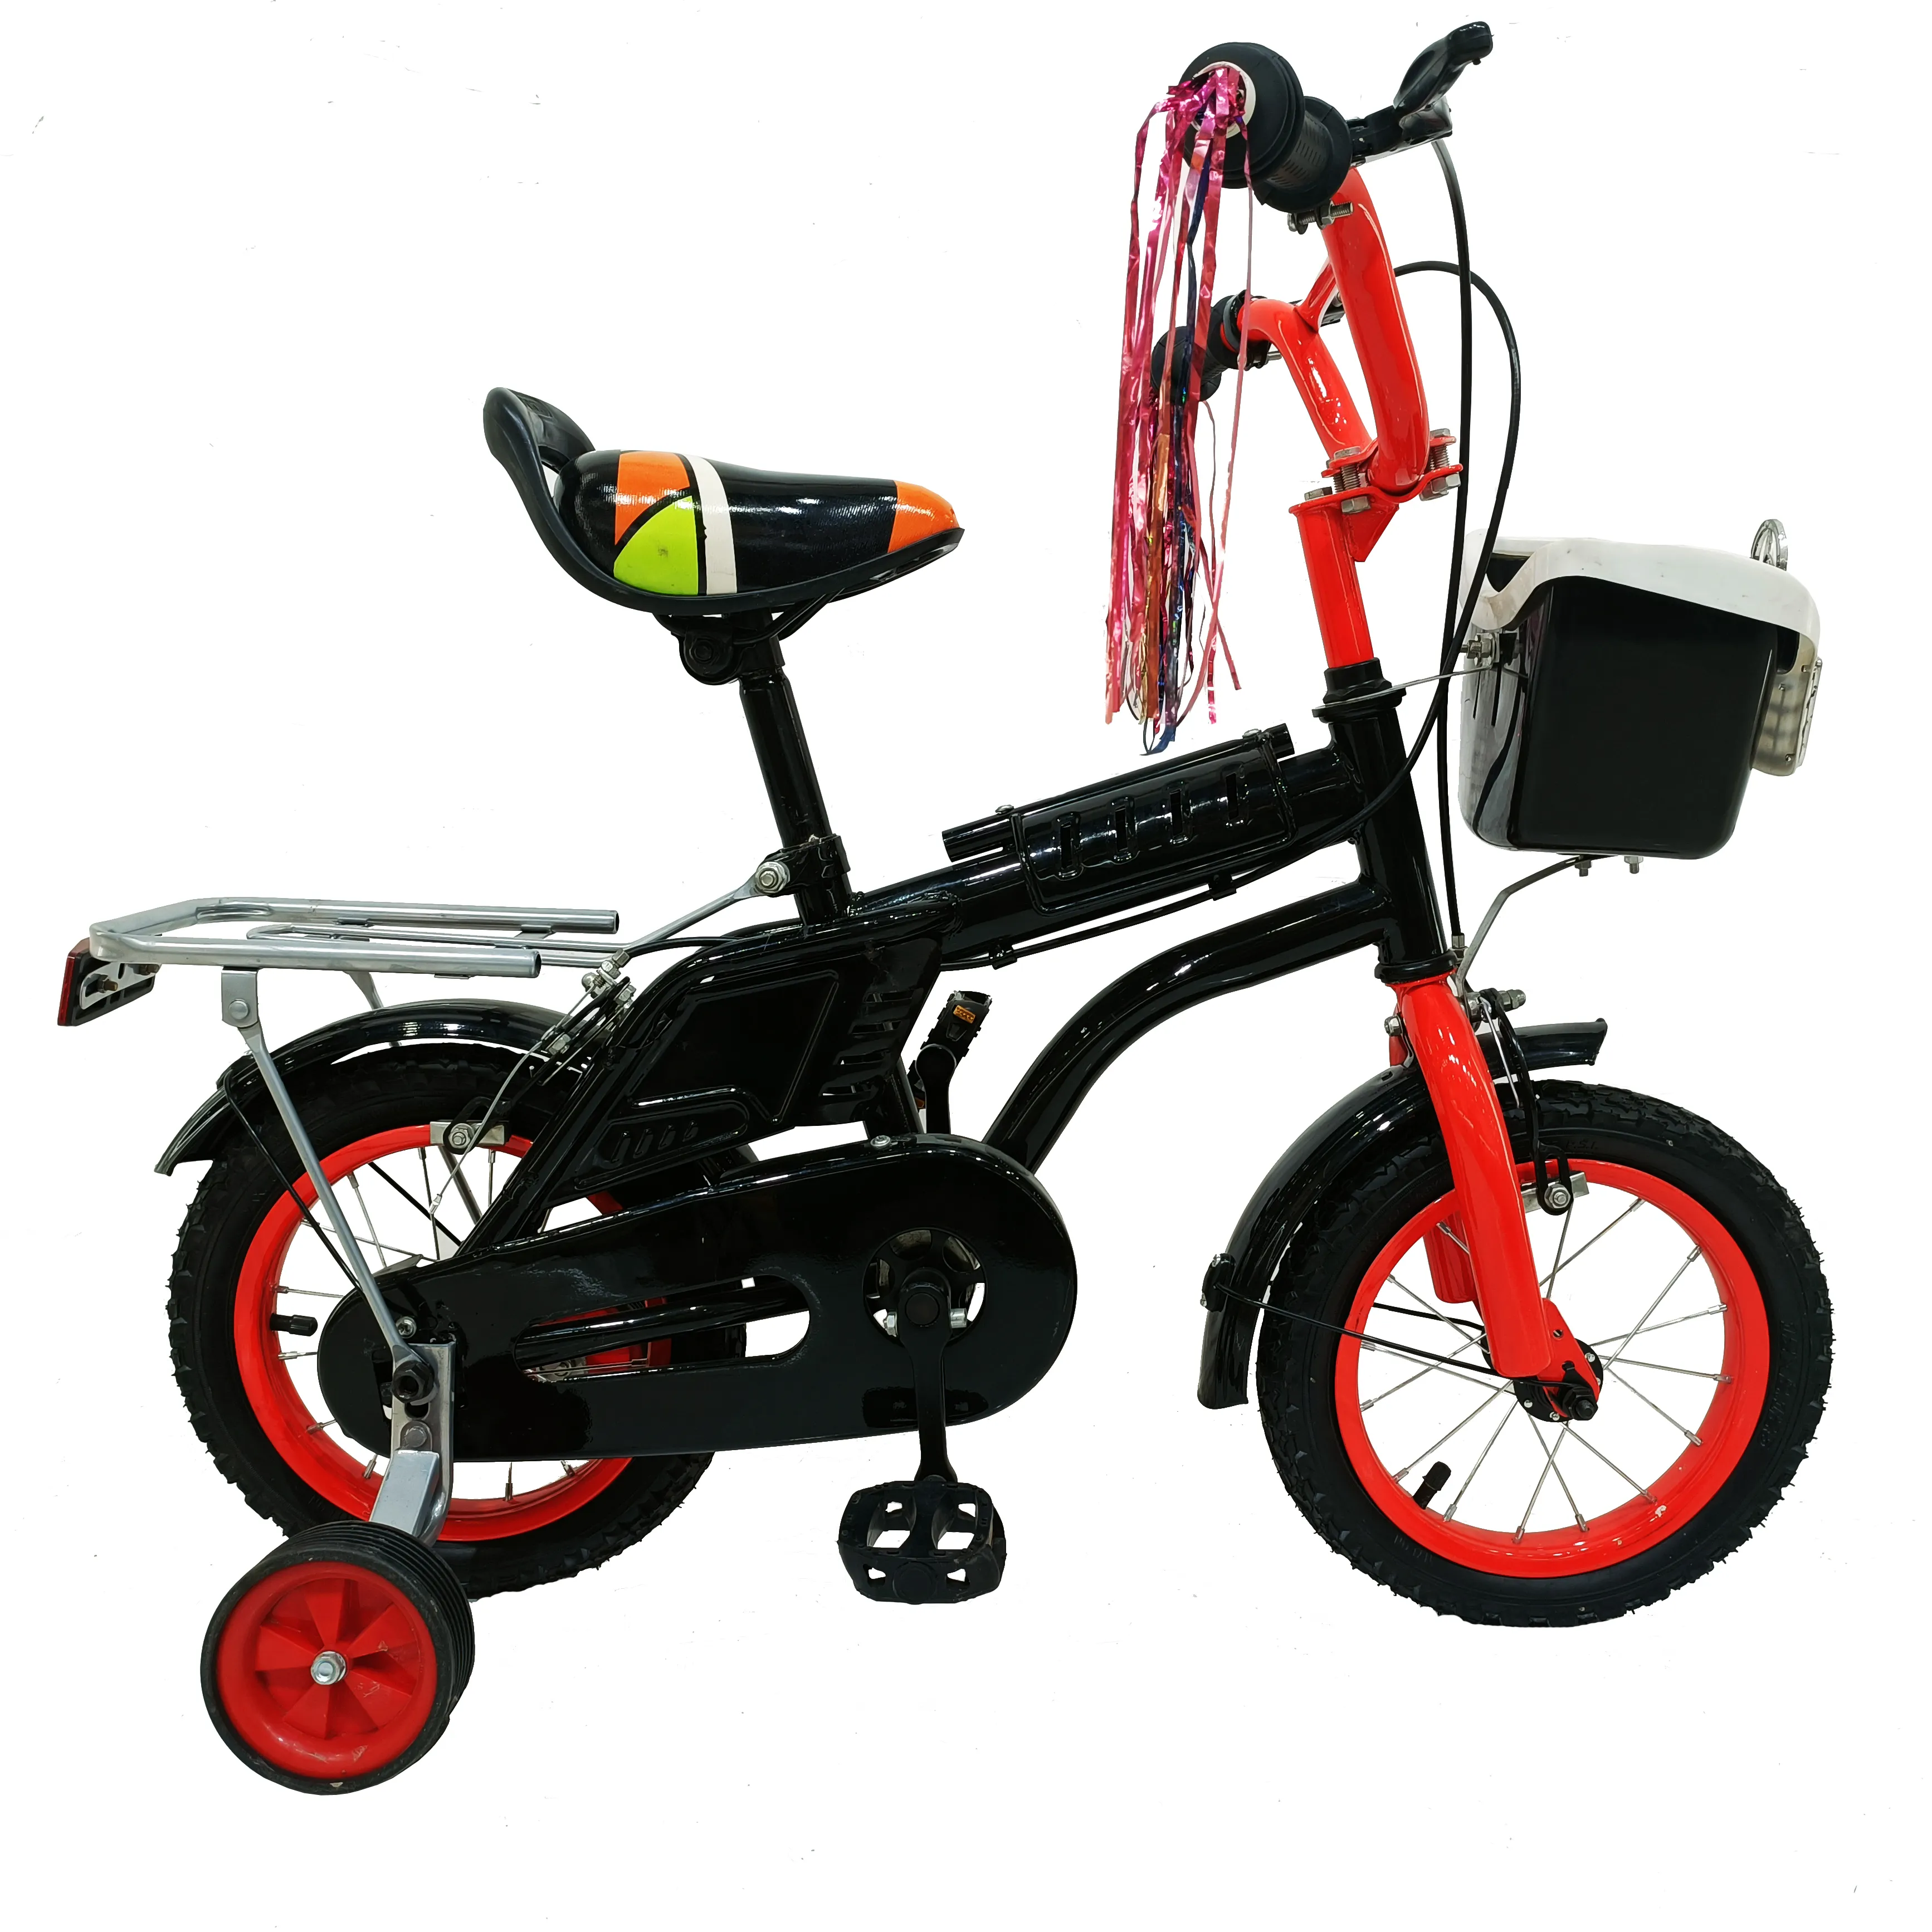 China bicycle factory wholesale price 12/16/20 inch kids bikes with training wheels cheap price children bicycle parts wheel